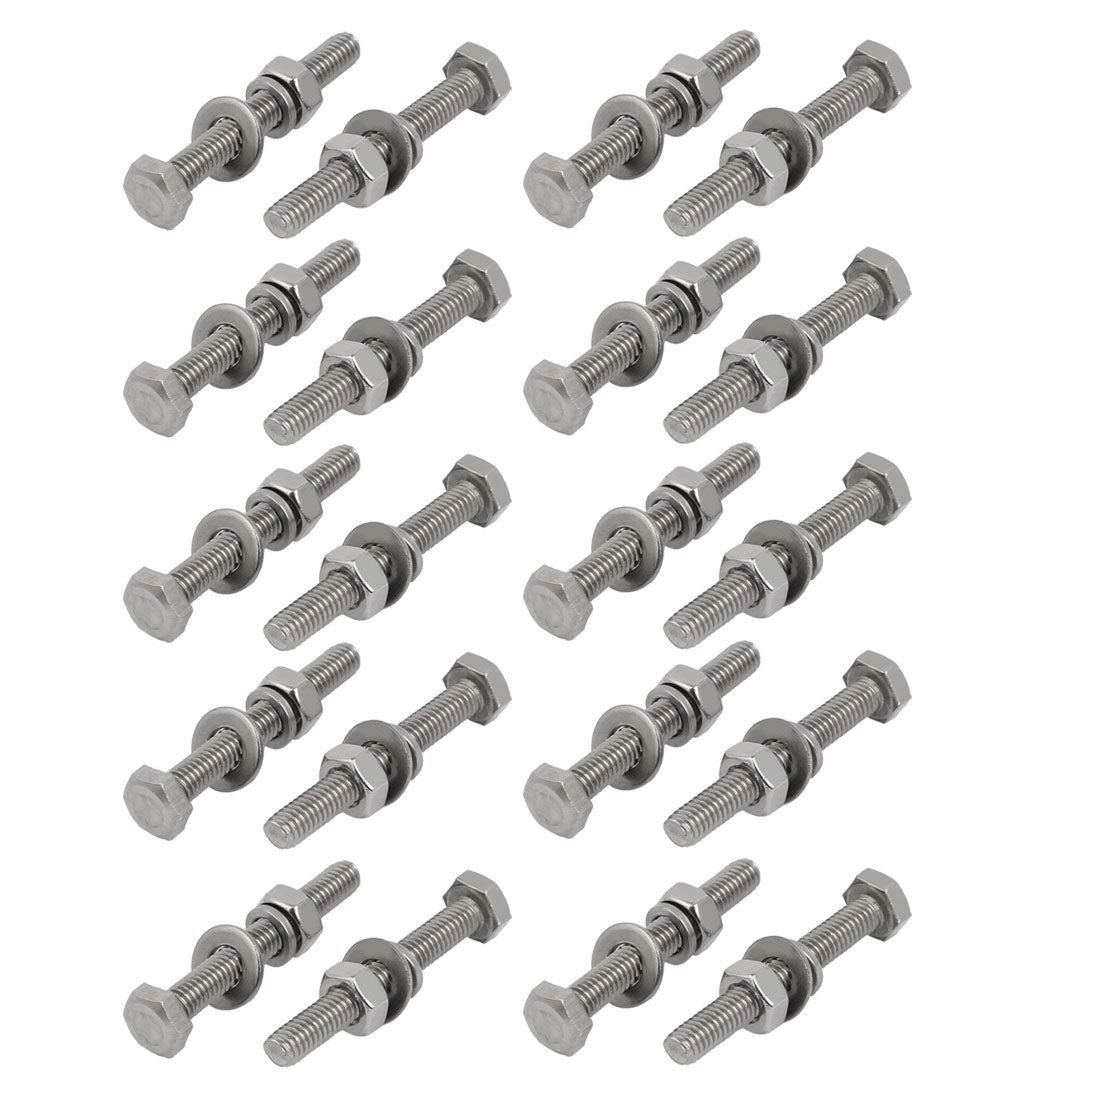 uxcell Uxcell 20pcs 304 Stainless Steel M4x30mm Hex Bolts w Nuts and Washers Assortment Kit